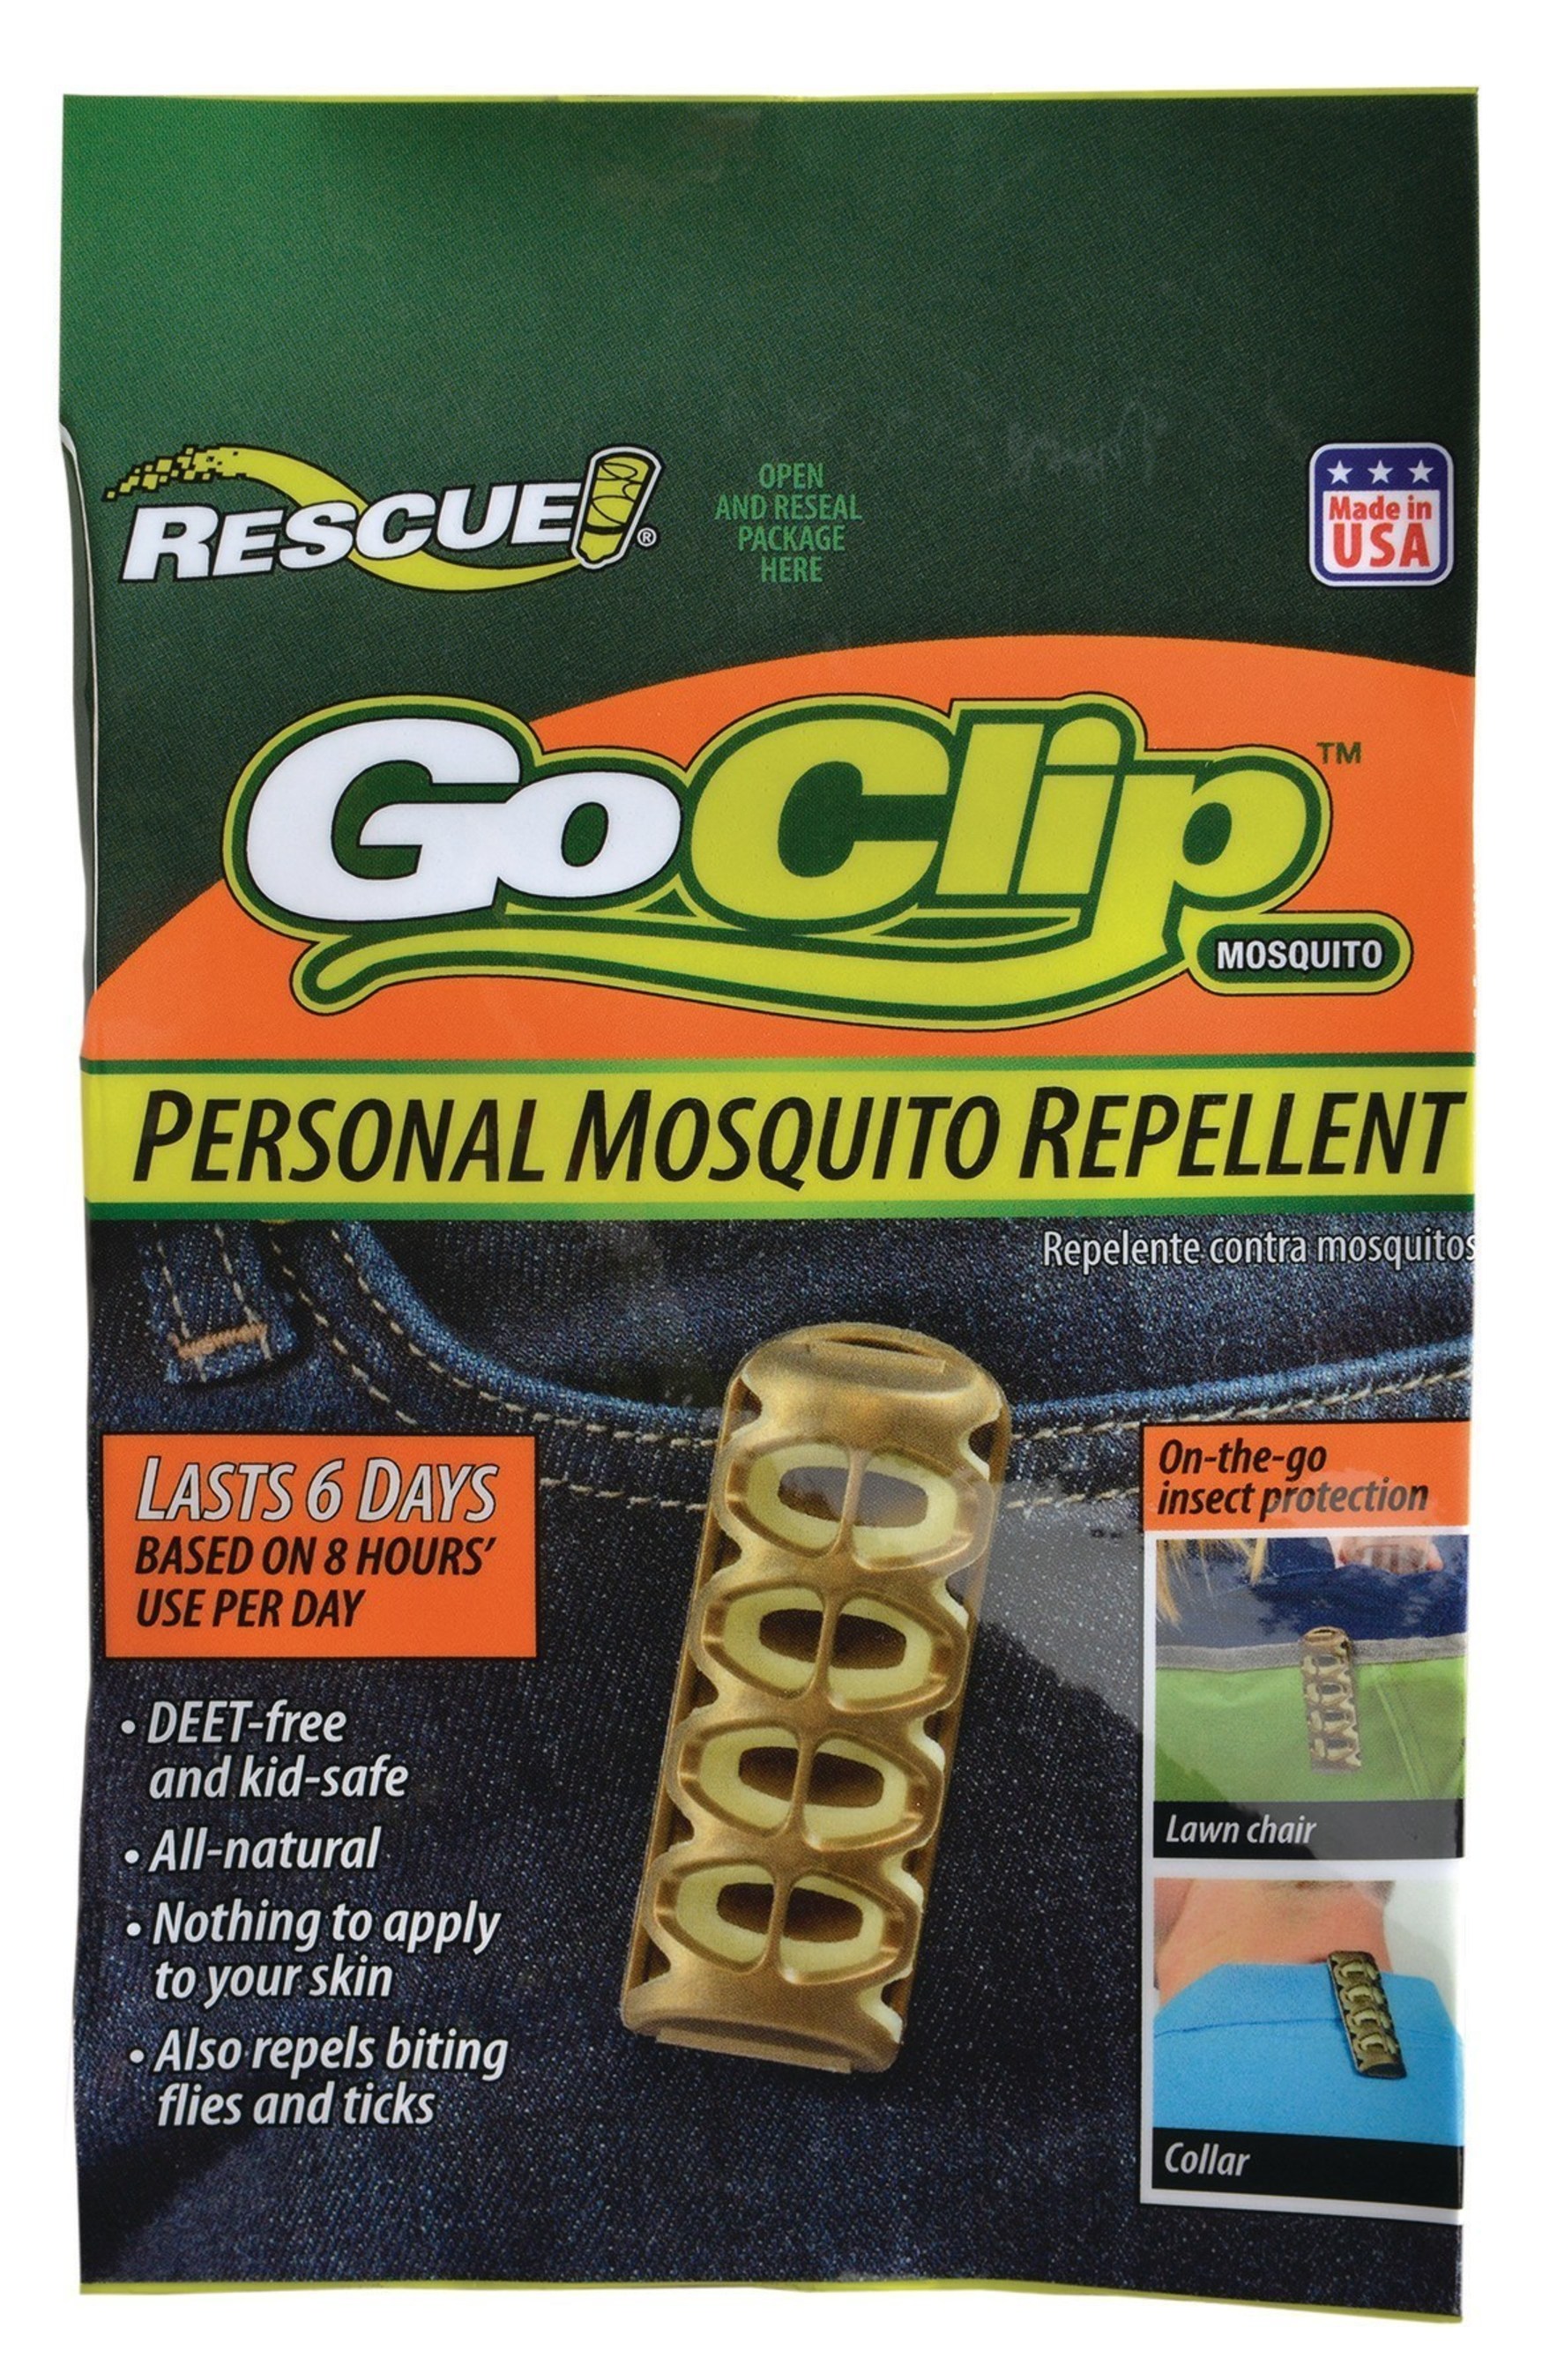 The GoClip(TM) repellency against mosquitoes, biting flies and ticks will last a total of 48 hours -- or 6 days, based on 8 hours' use per day. When not in use, the resealable zippered package helps it maintain potency.